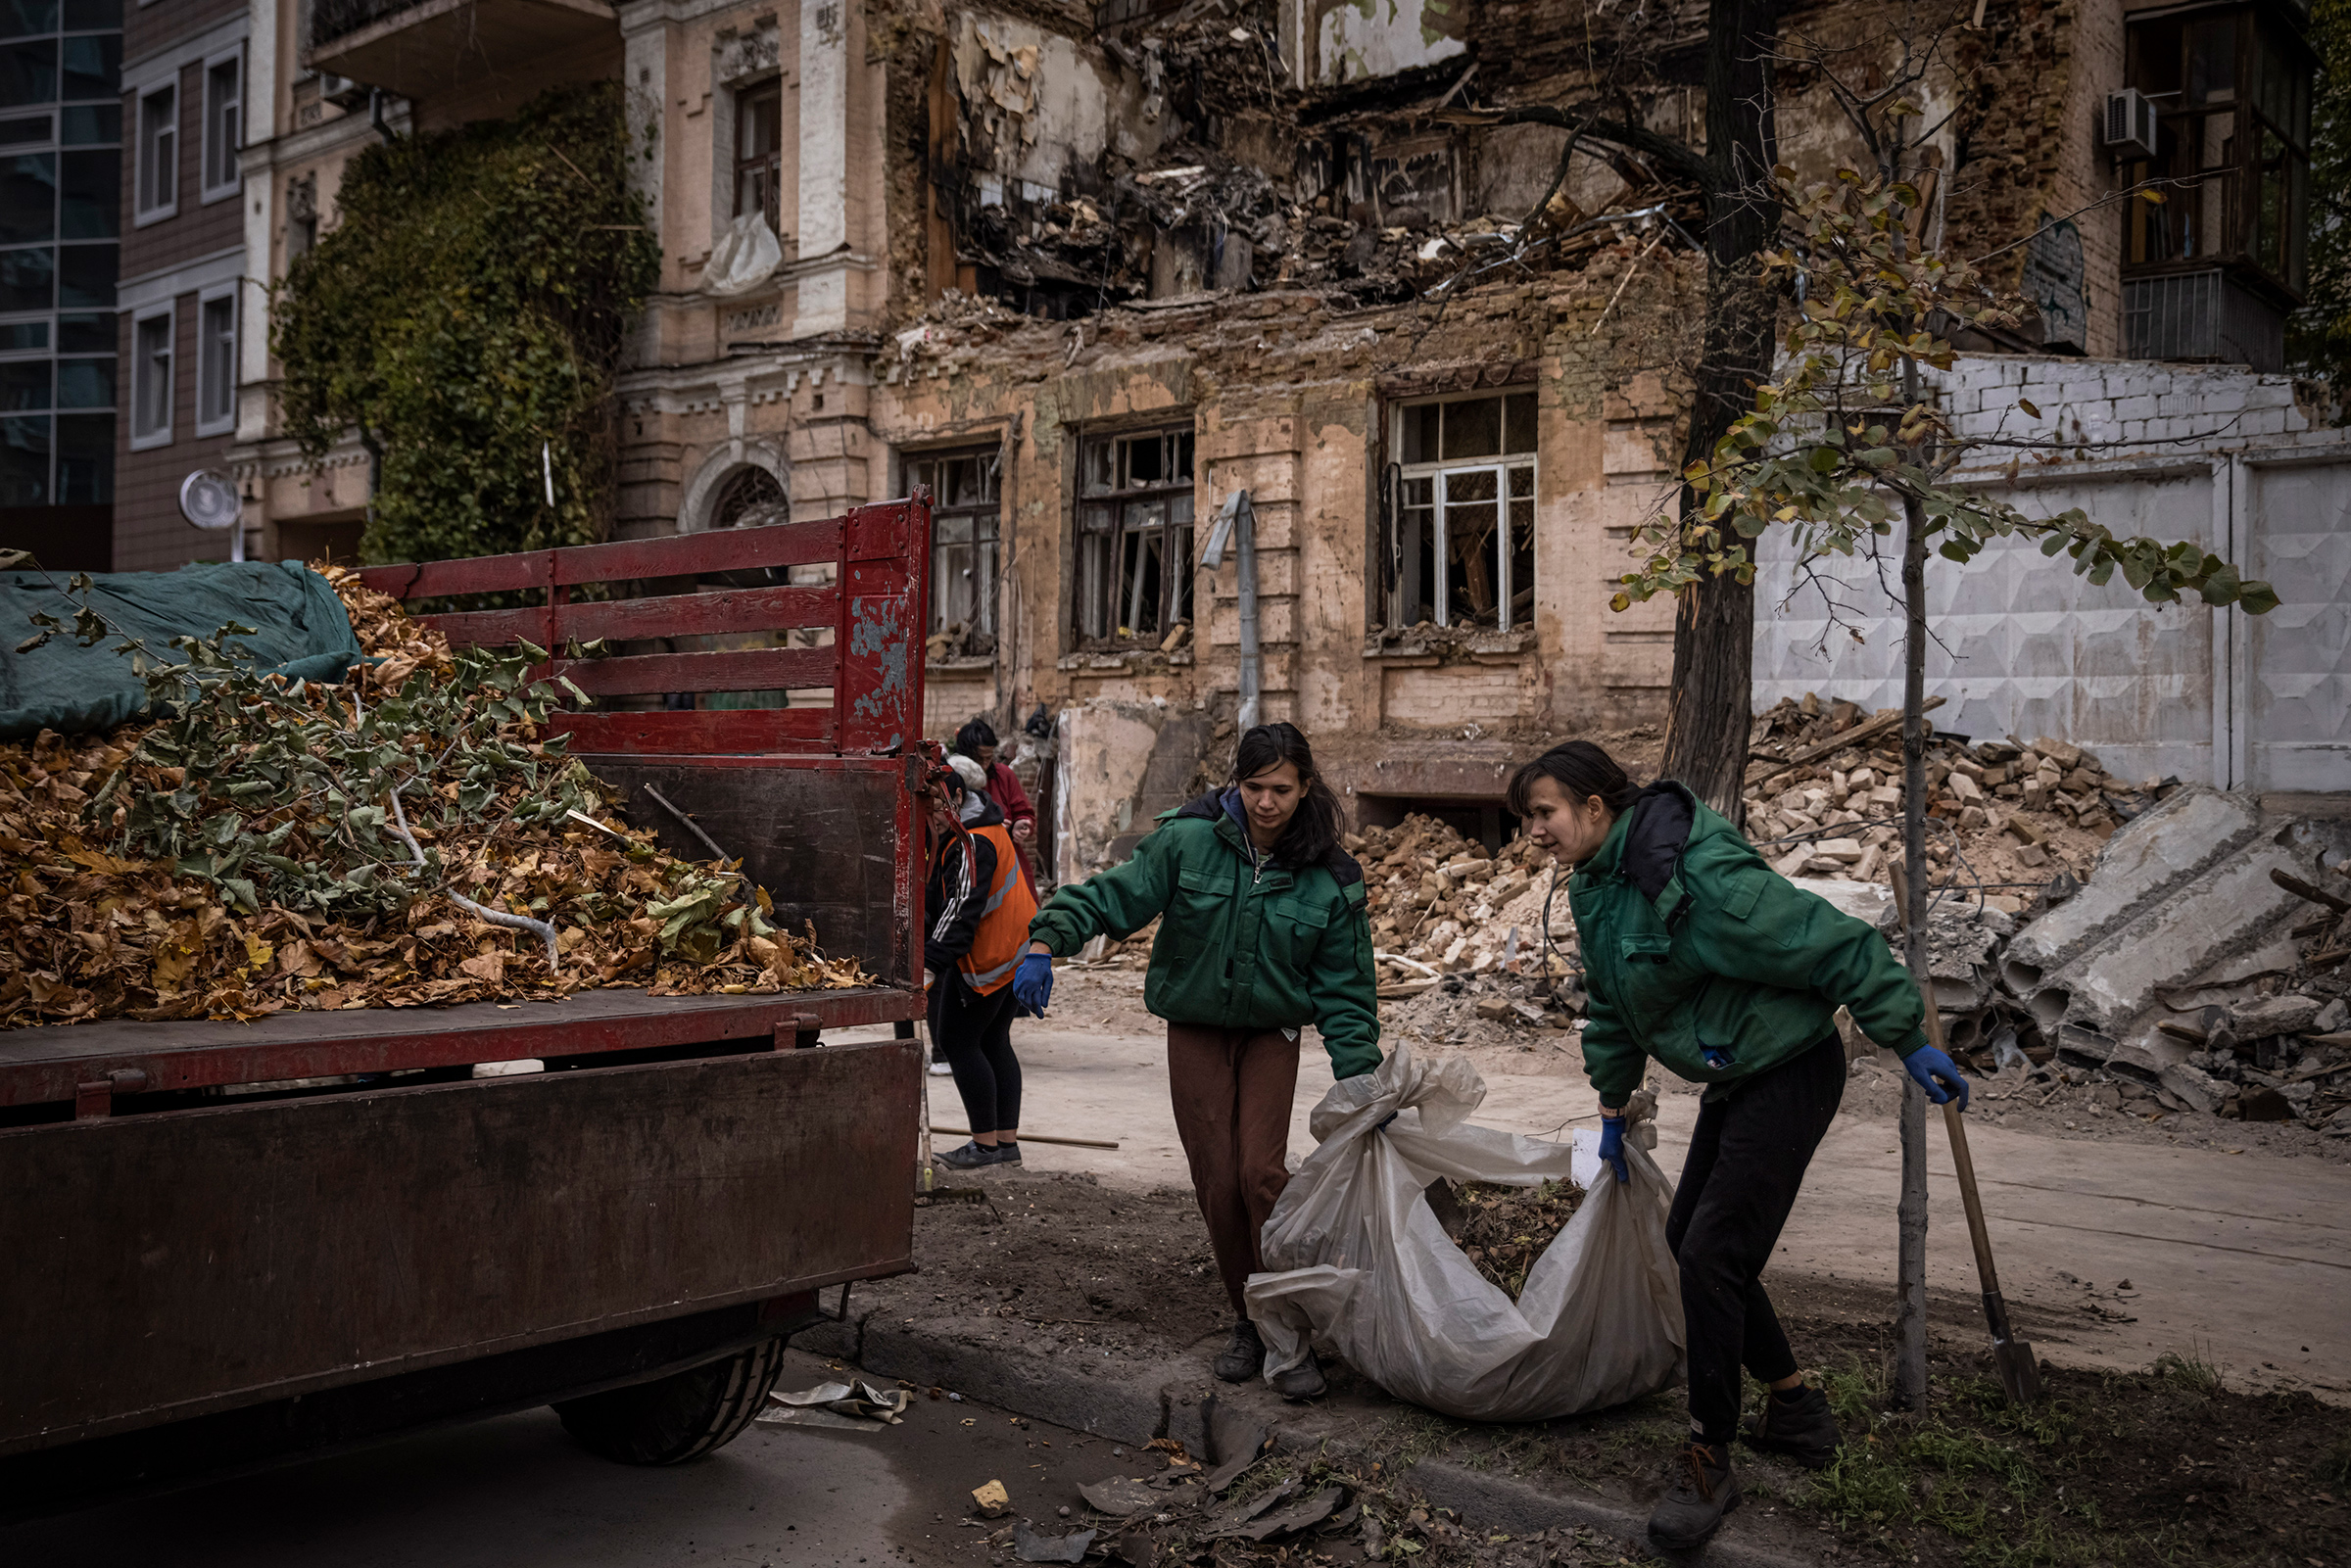 People clear blast debris and leaves outside a house where a couple was killed in a Russian drone strike two days beforehand on Oct.19 in Kyiv, Ukraine. (Ed Ram—Getty Images)